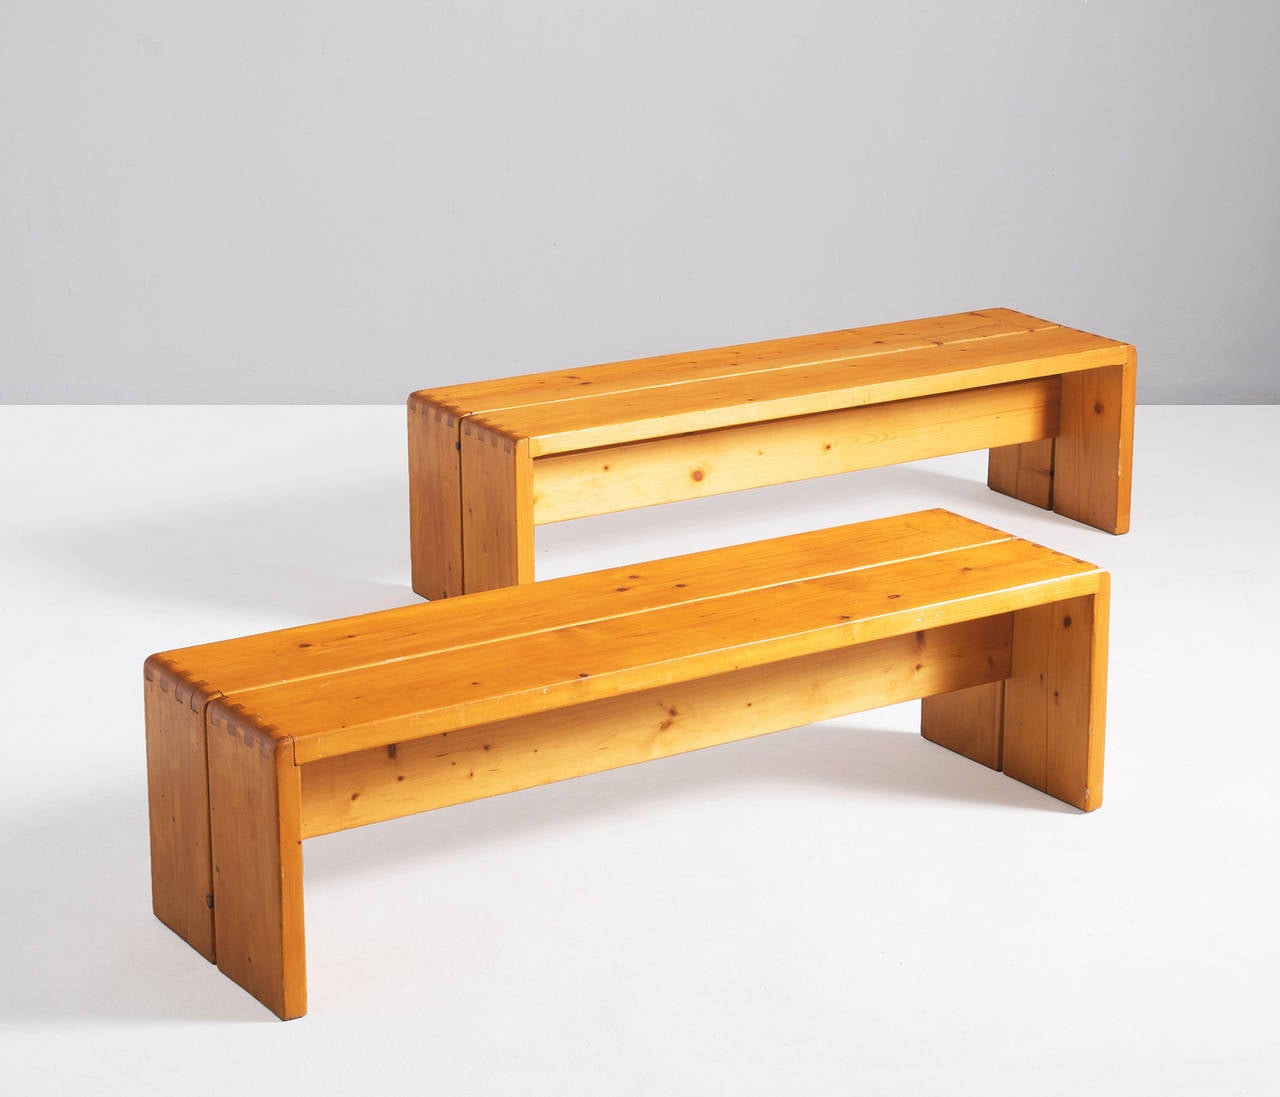 Set of two benches in solid pine by Charlotte Perriand designed for 'Les Arcs', 1960's. Very solid construction, well made designed wood joints.

Les Arcs opened their first (ski)resort in 1968 named 'Arc 1600'. 
Instantly, the modern